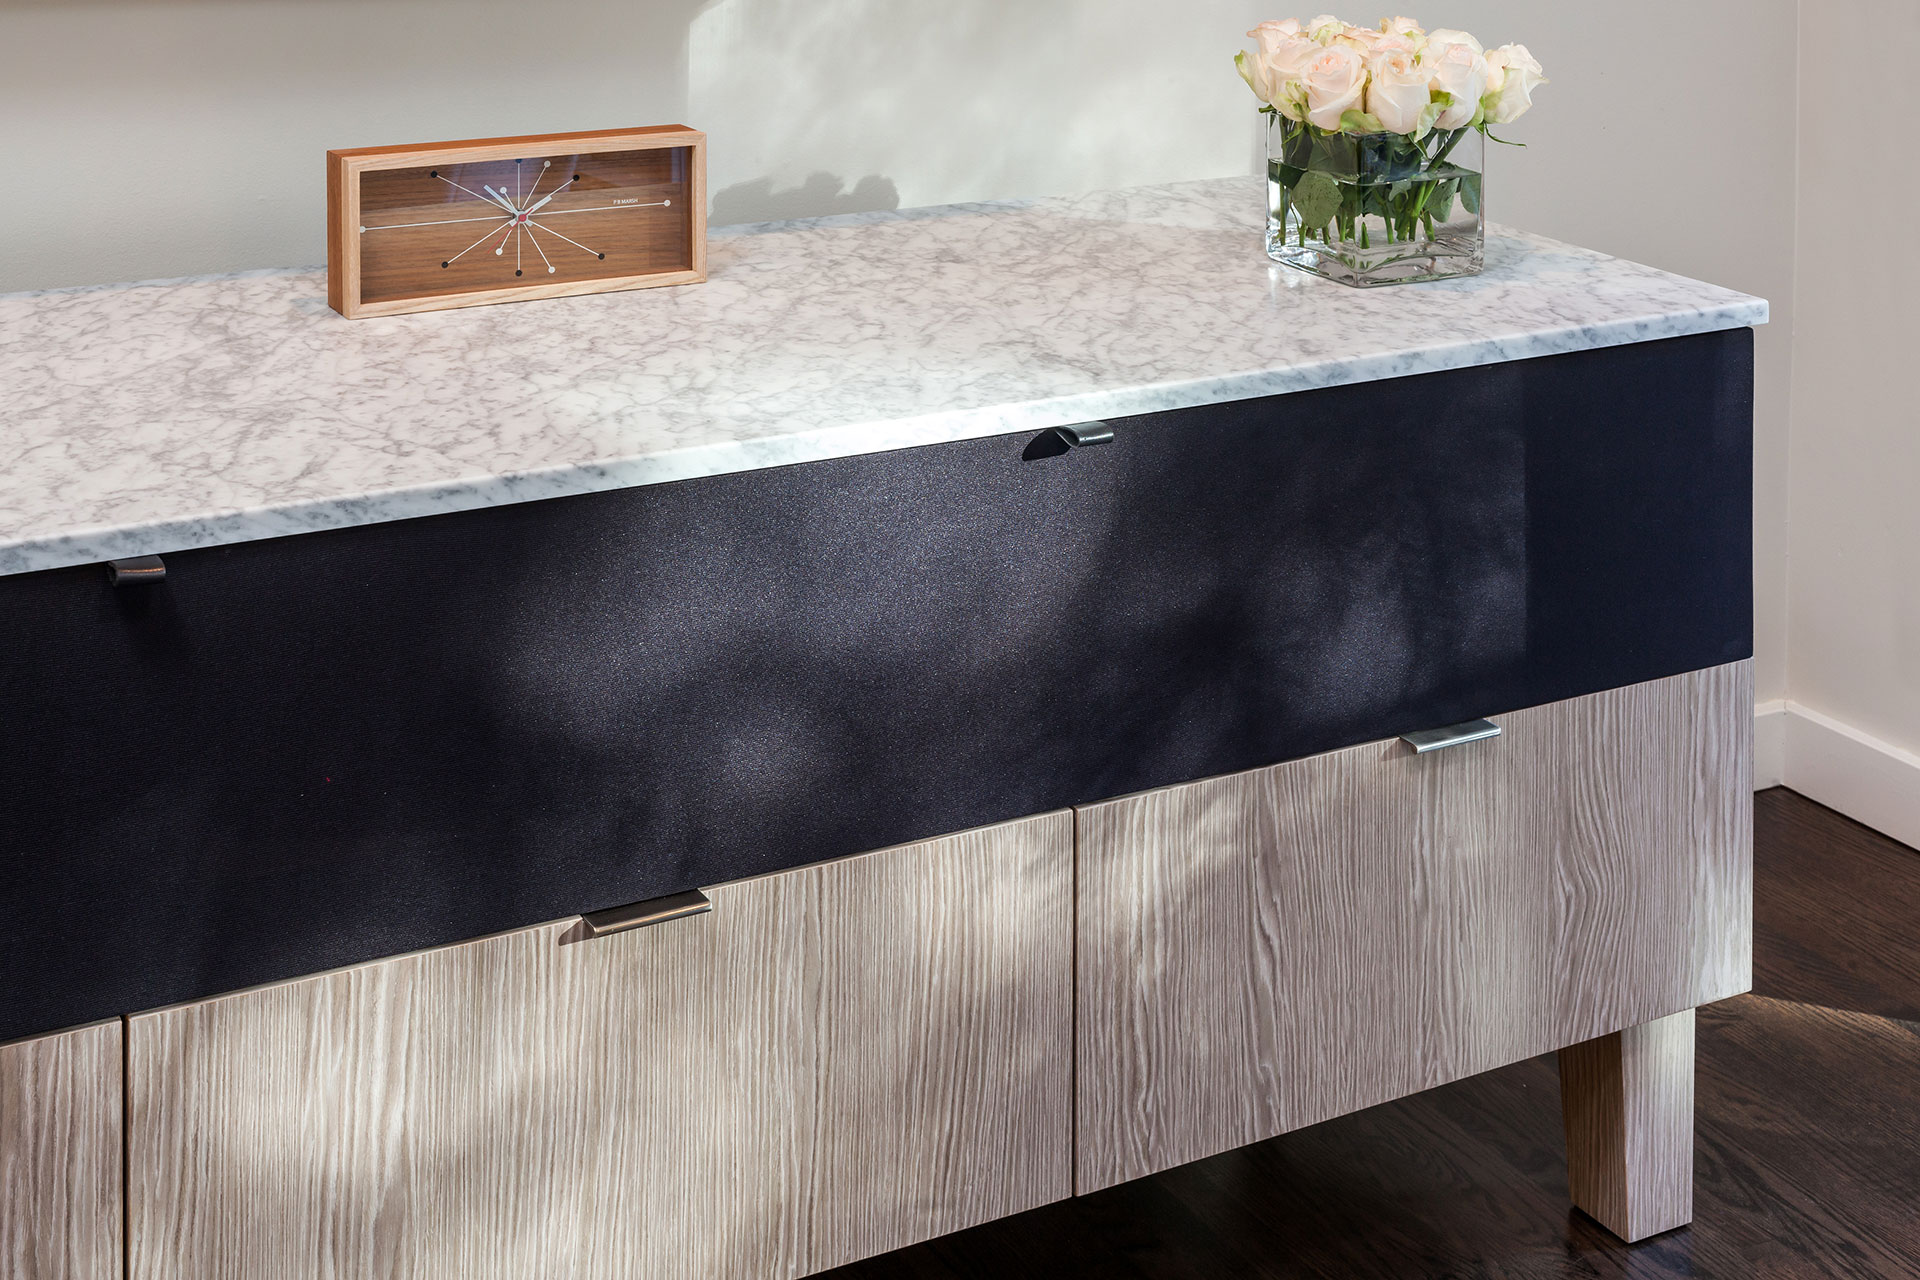 Carrara marble and white oak are used to create a custom stereo cabinet at the Patton Modern.